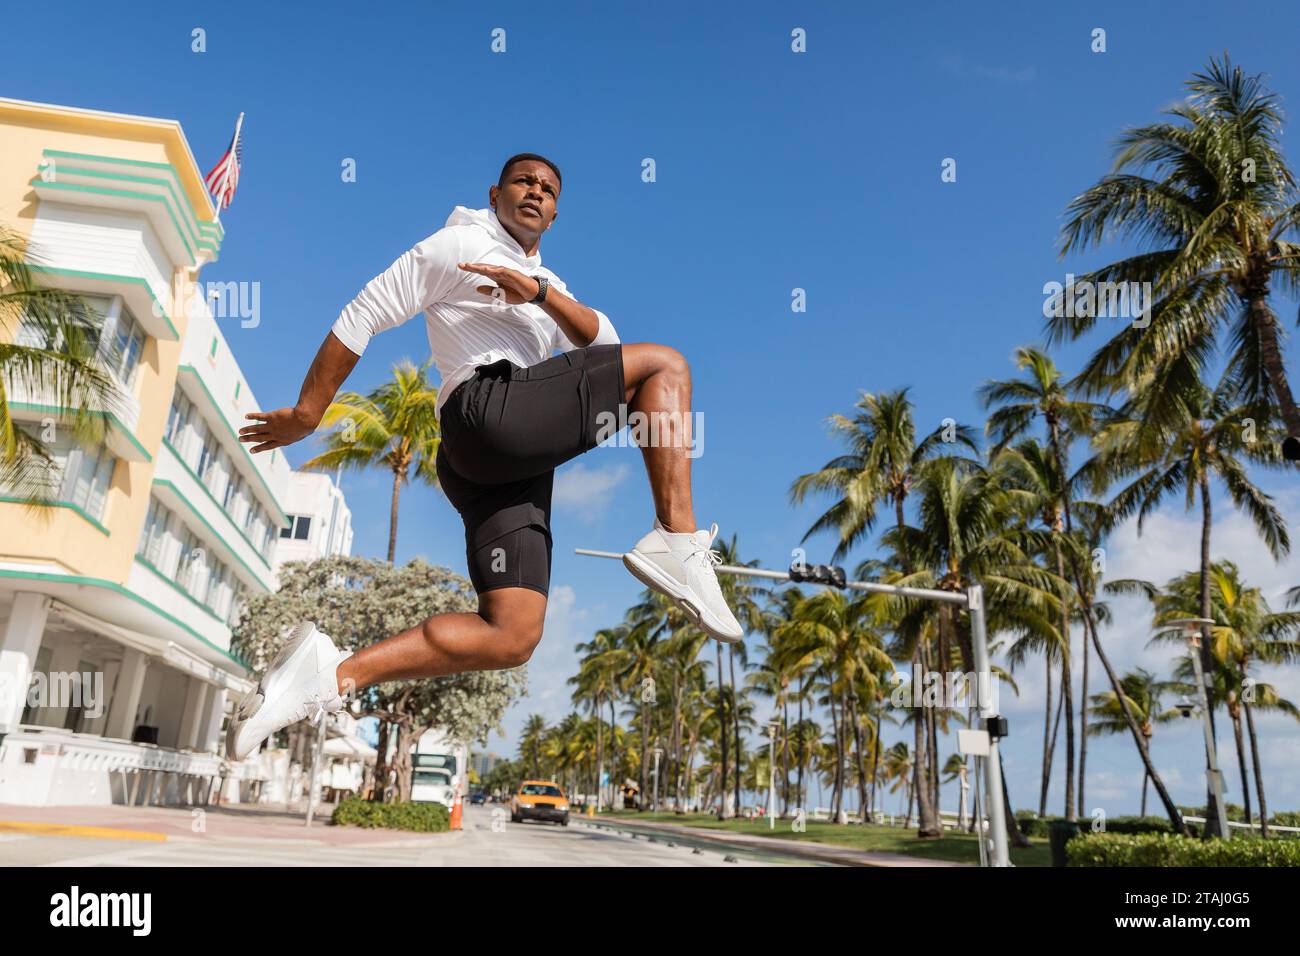 sportive african american man jumping next to palm trees and modern condominium in Miami Stock Photo